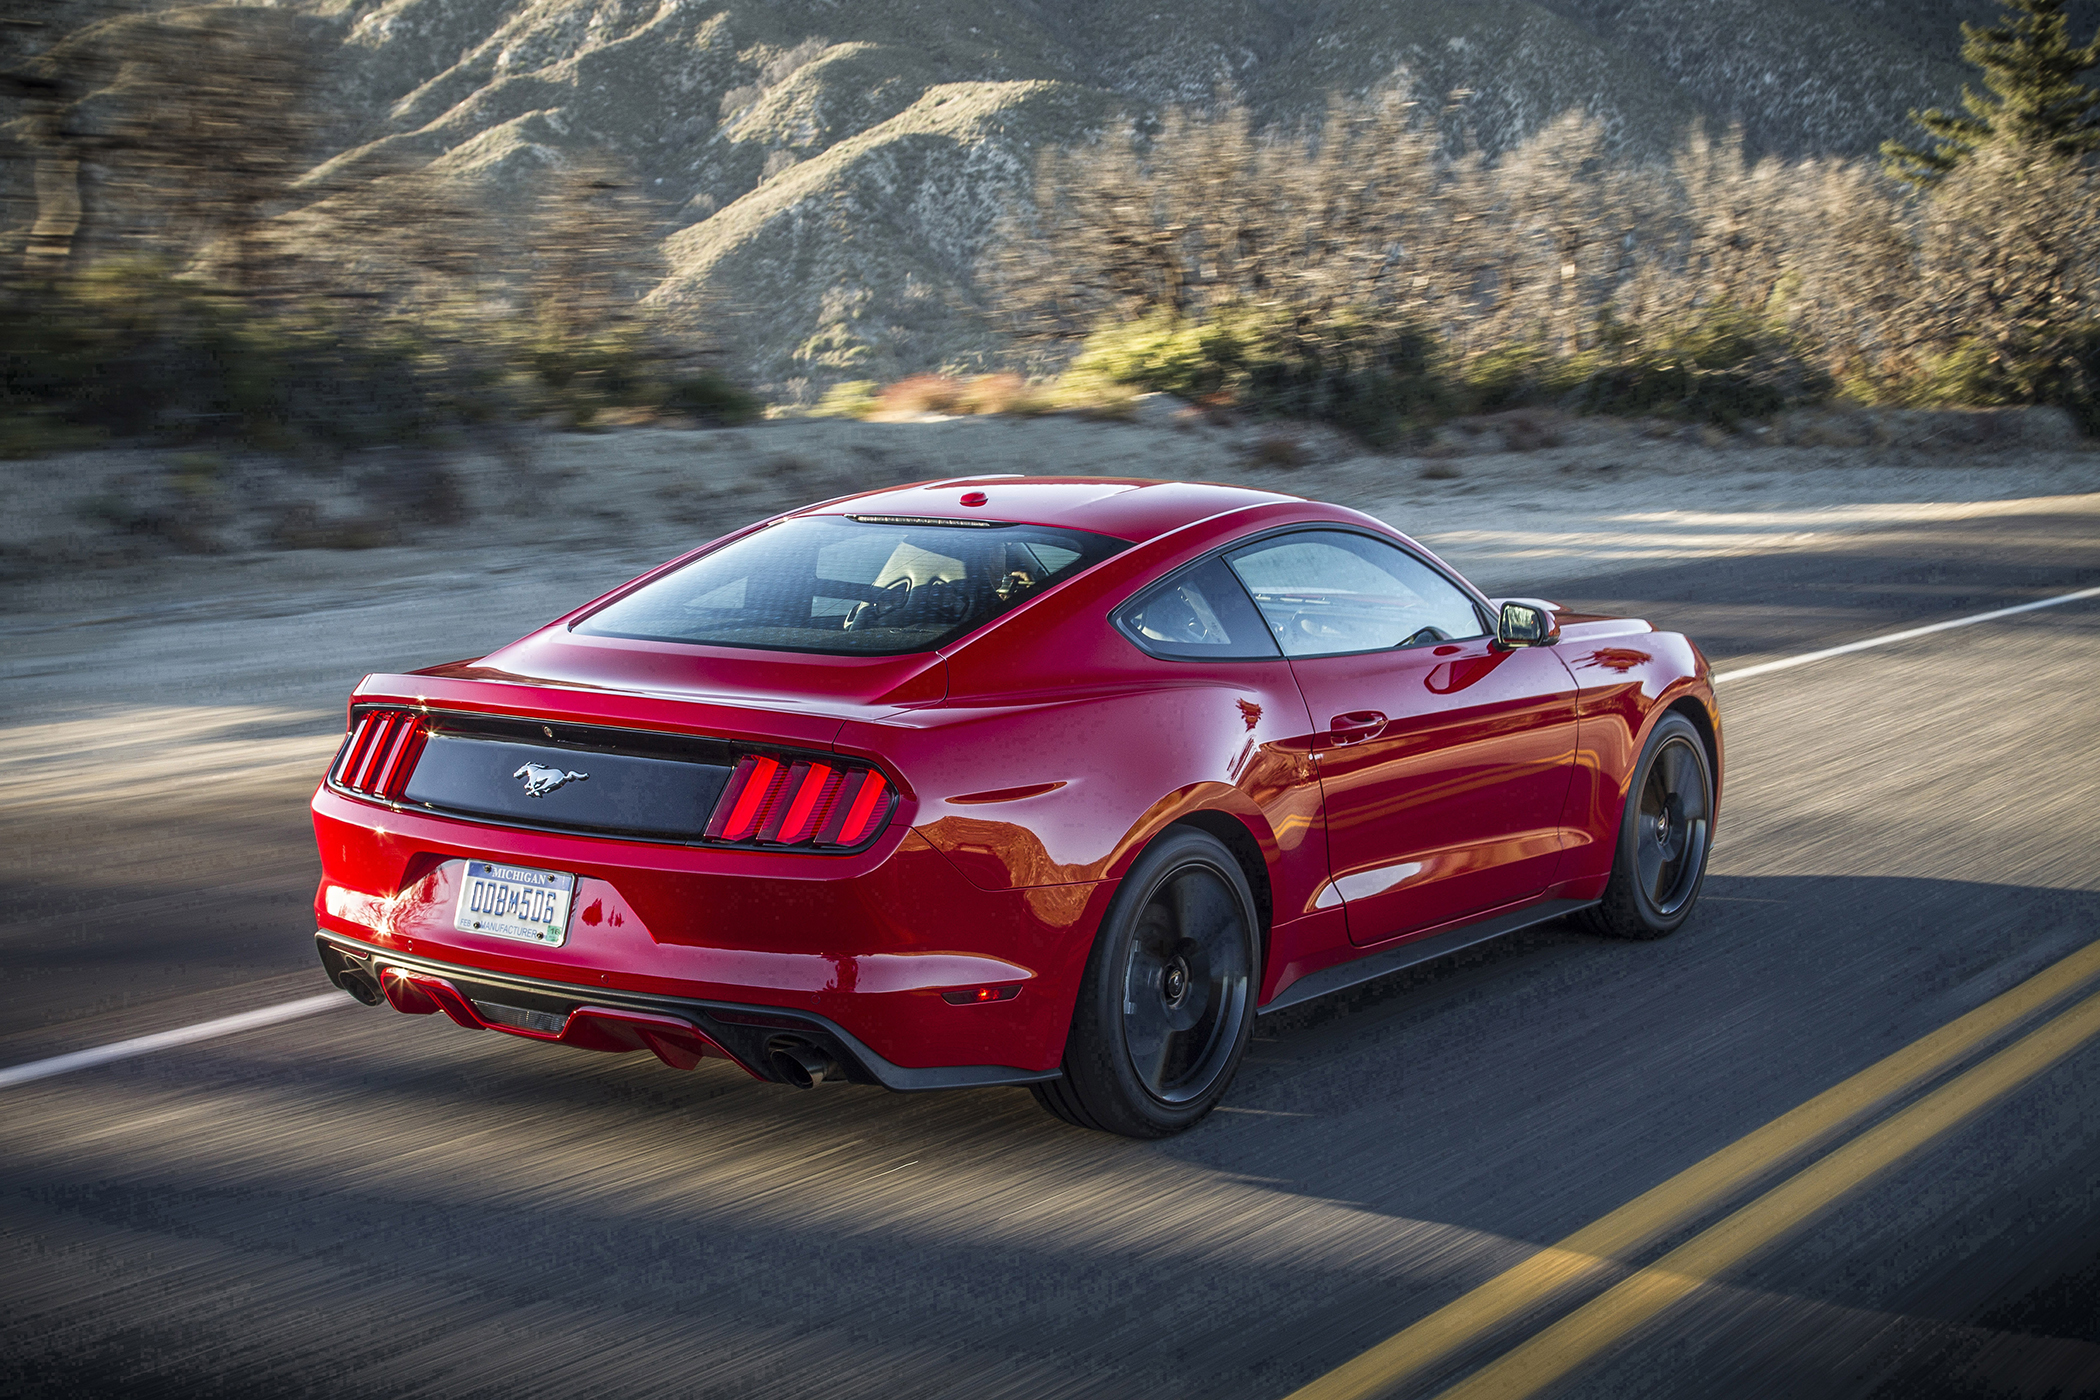 <strong>Best Coupe:</strong> The <a href="http://www.edmunds.com/ford/mustang/2015/" target="_blank">Ford Mustang</a>, which was fully redesigned in 2015, is more fuel efficient than any of the previous models. But those fuel savings don't ease the pain of the depreciation costs. The Mustang loses 35% of its value five years after you purchase it.